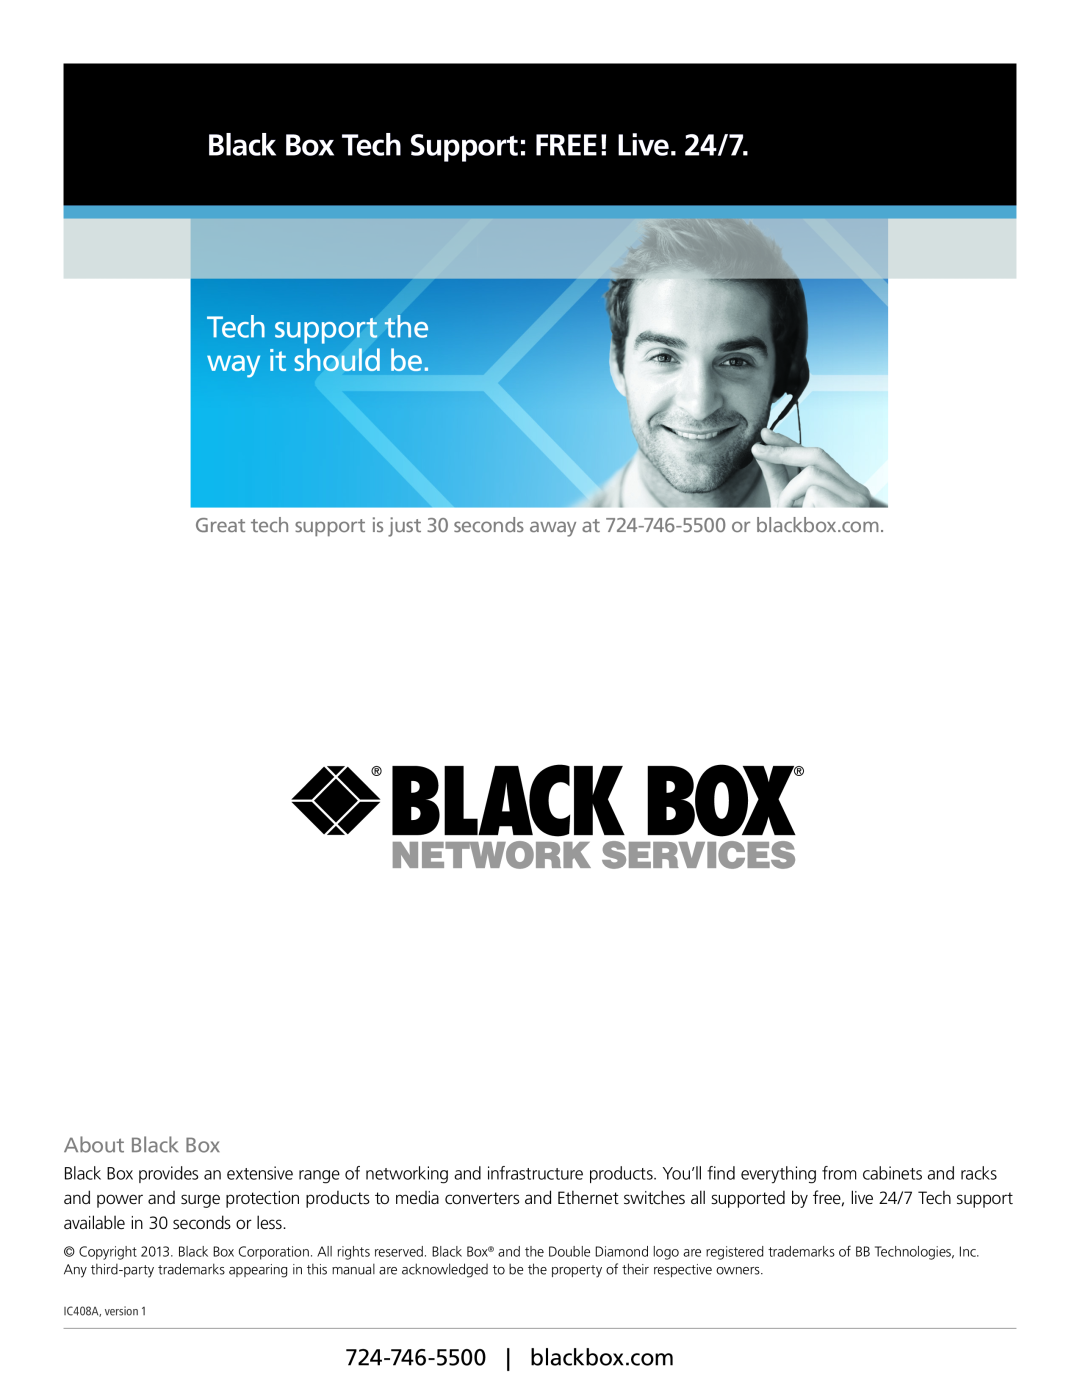 Black Box IC408A manual About Black Box, Black Box Tech Support FREE! Live. 24/7, Tech support the way it should be 